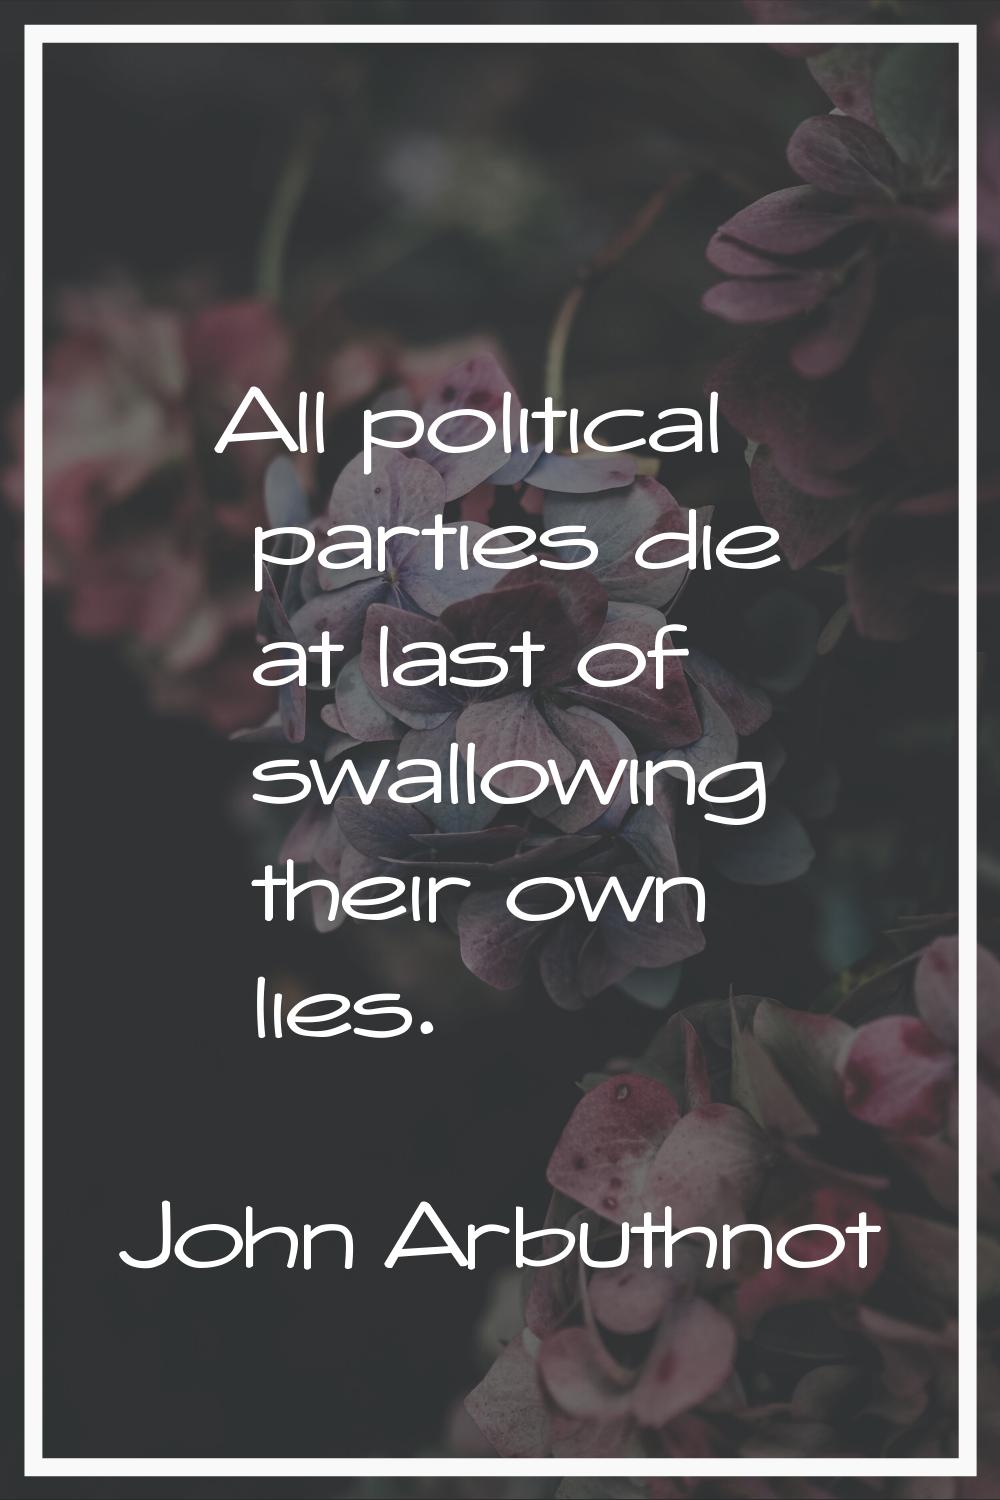 All political parties die at last of swallowing their own lies.